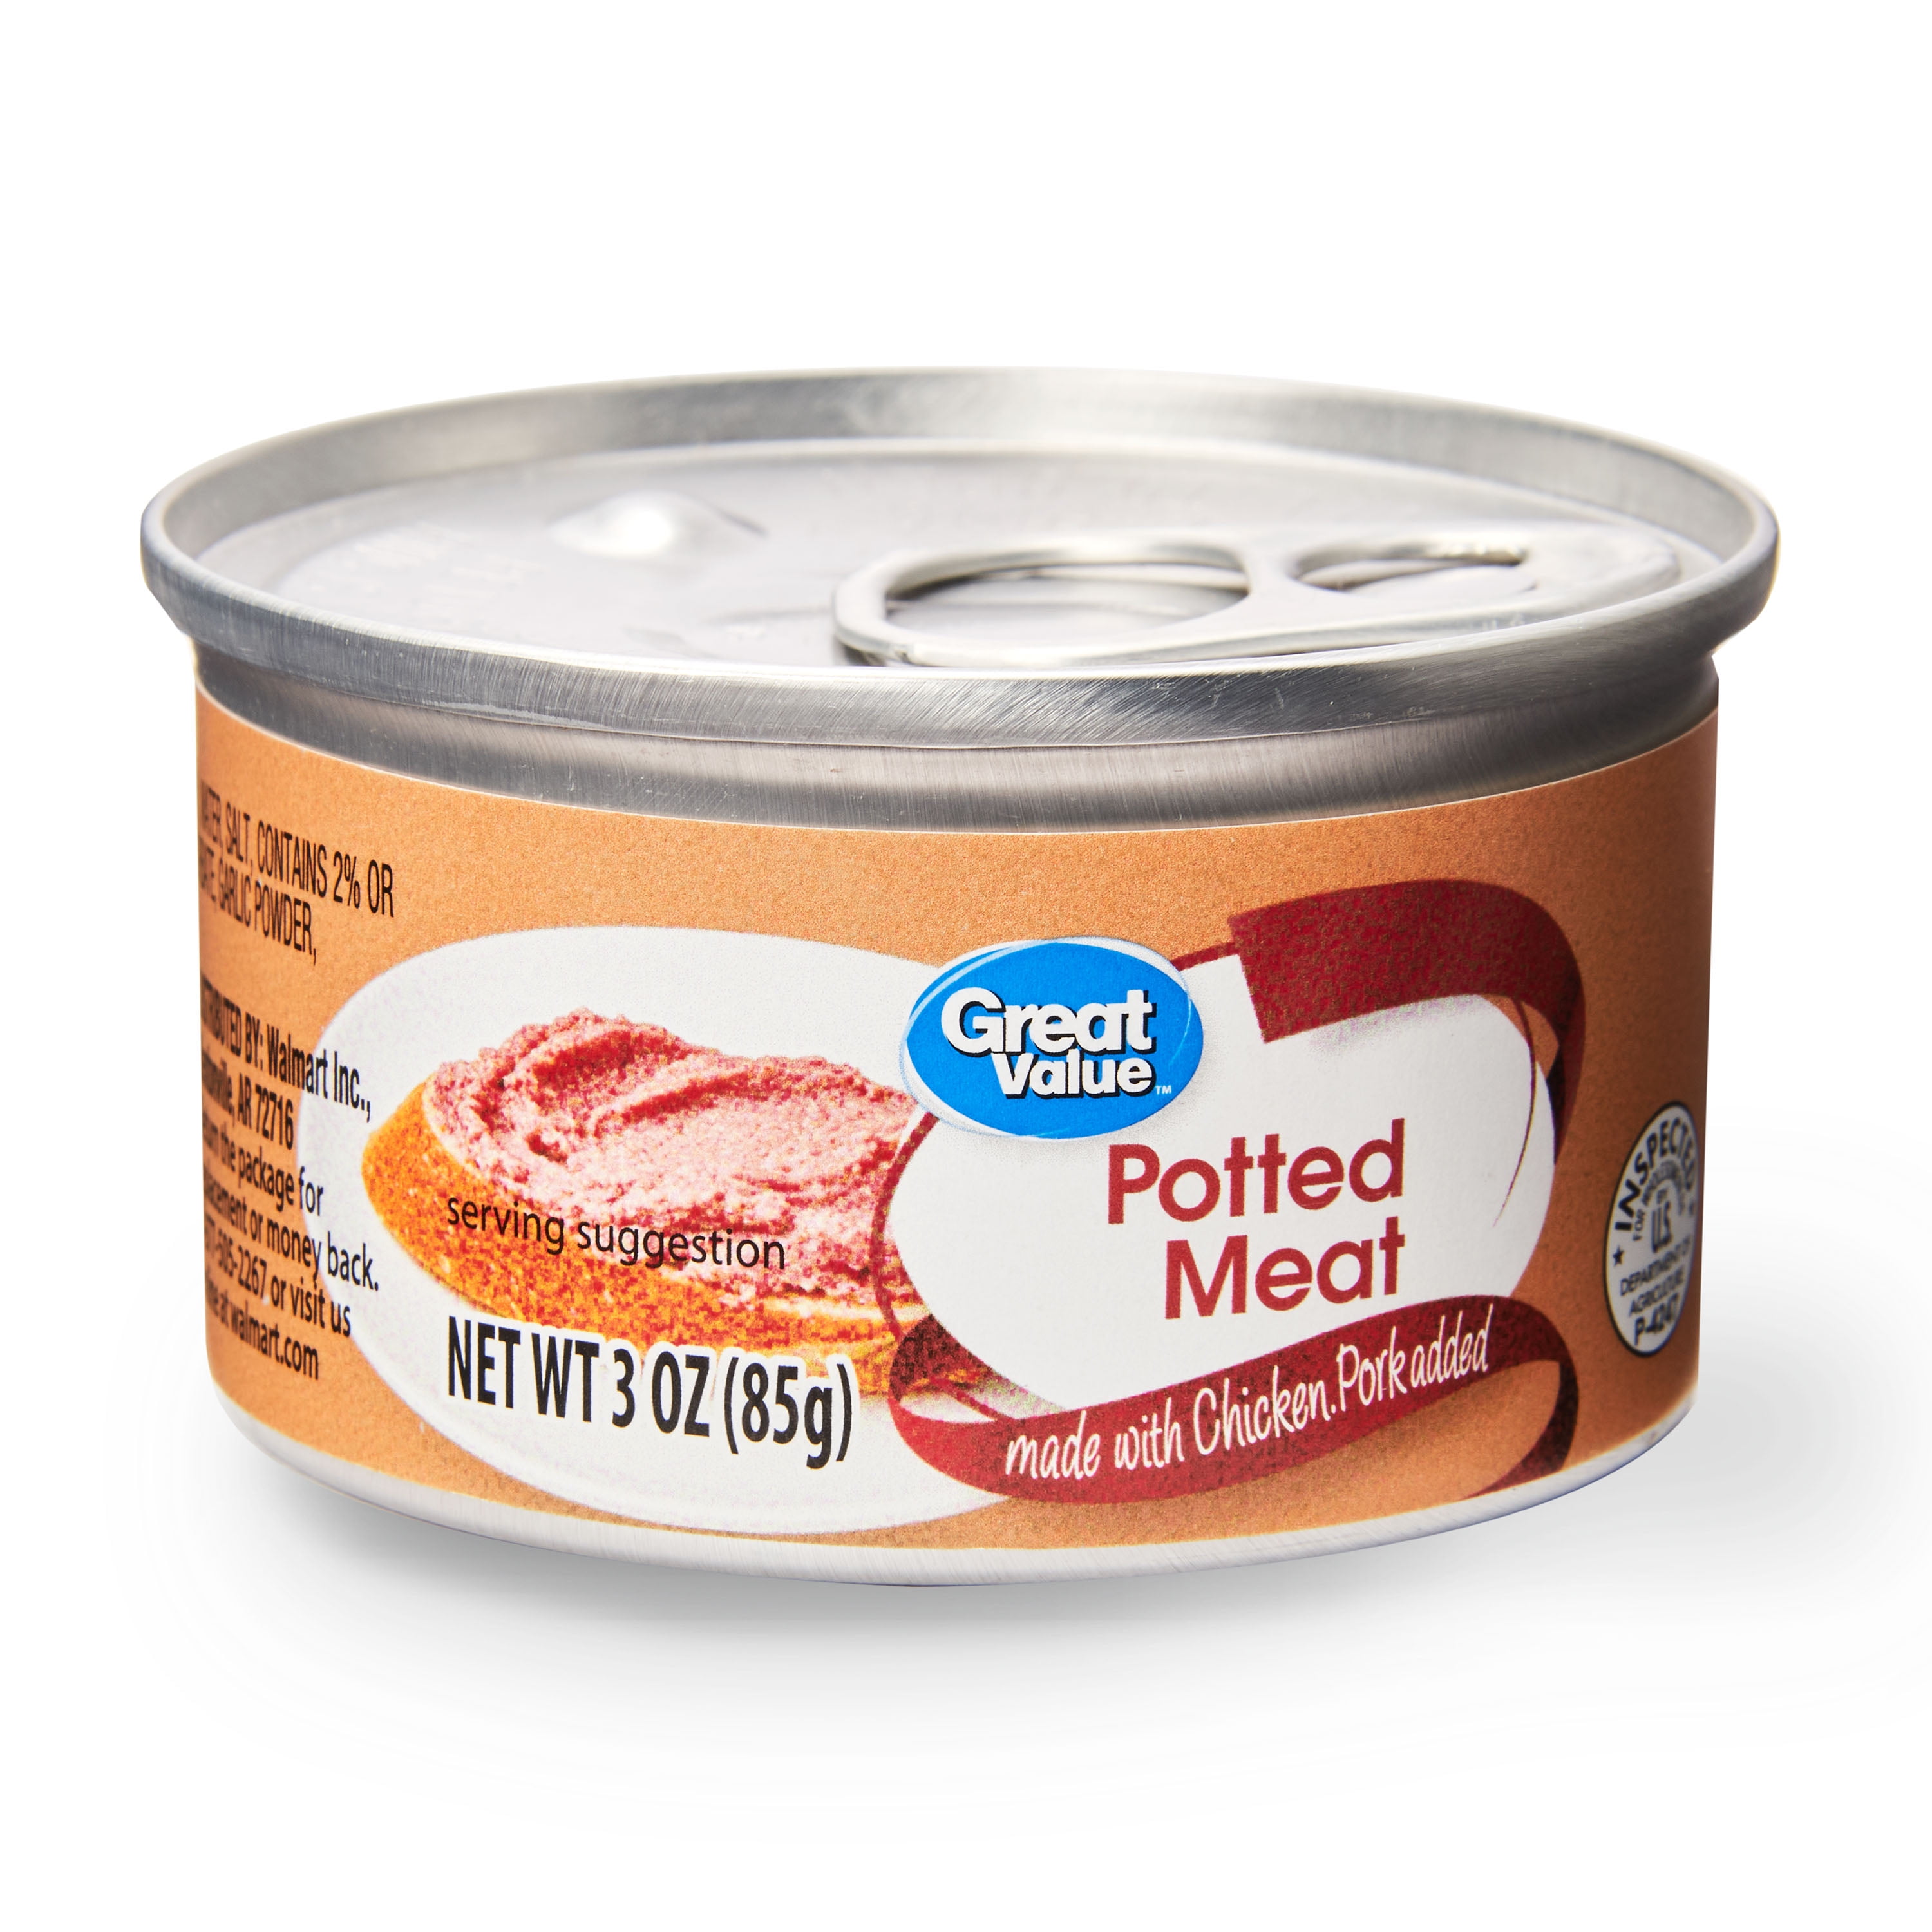 Great Value Potted Meat, 3 oz Can - Walmart.com.